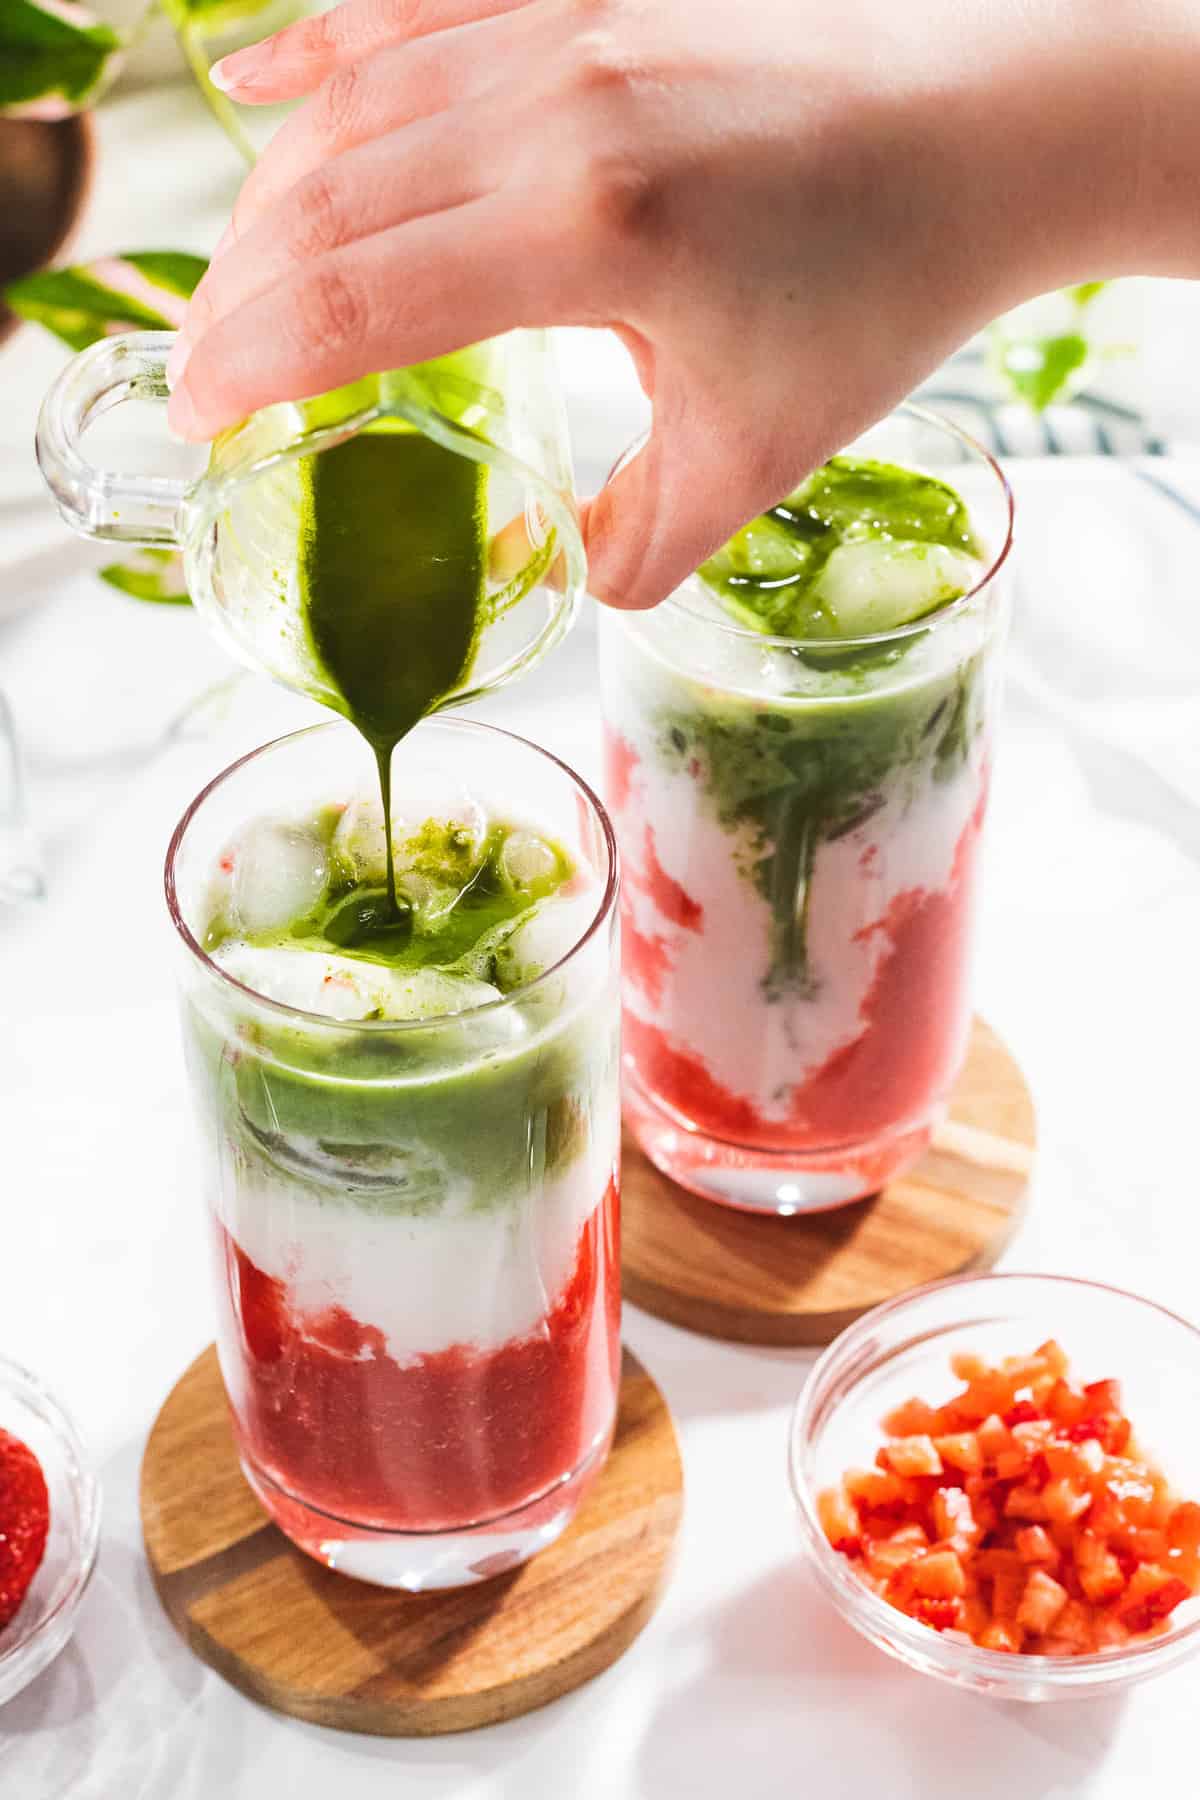 Green matcha poured into two glasses with milk and strawberries.